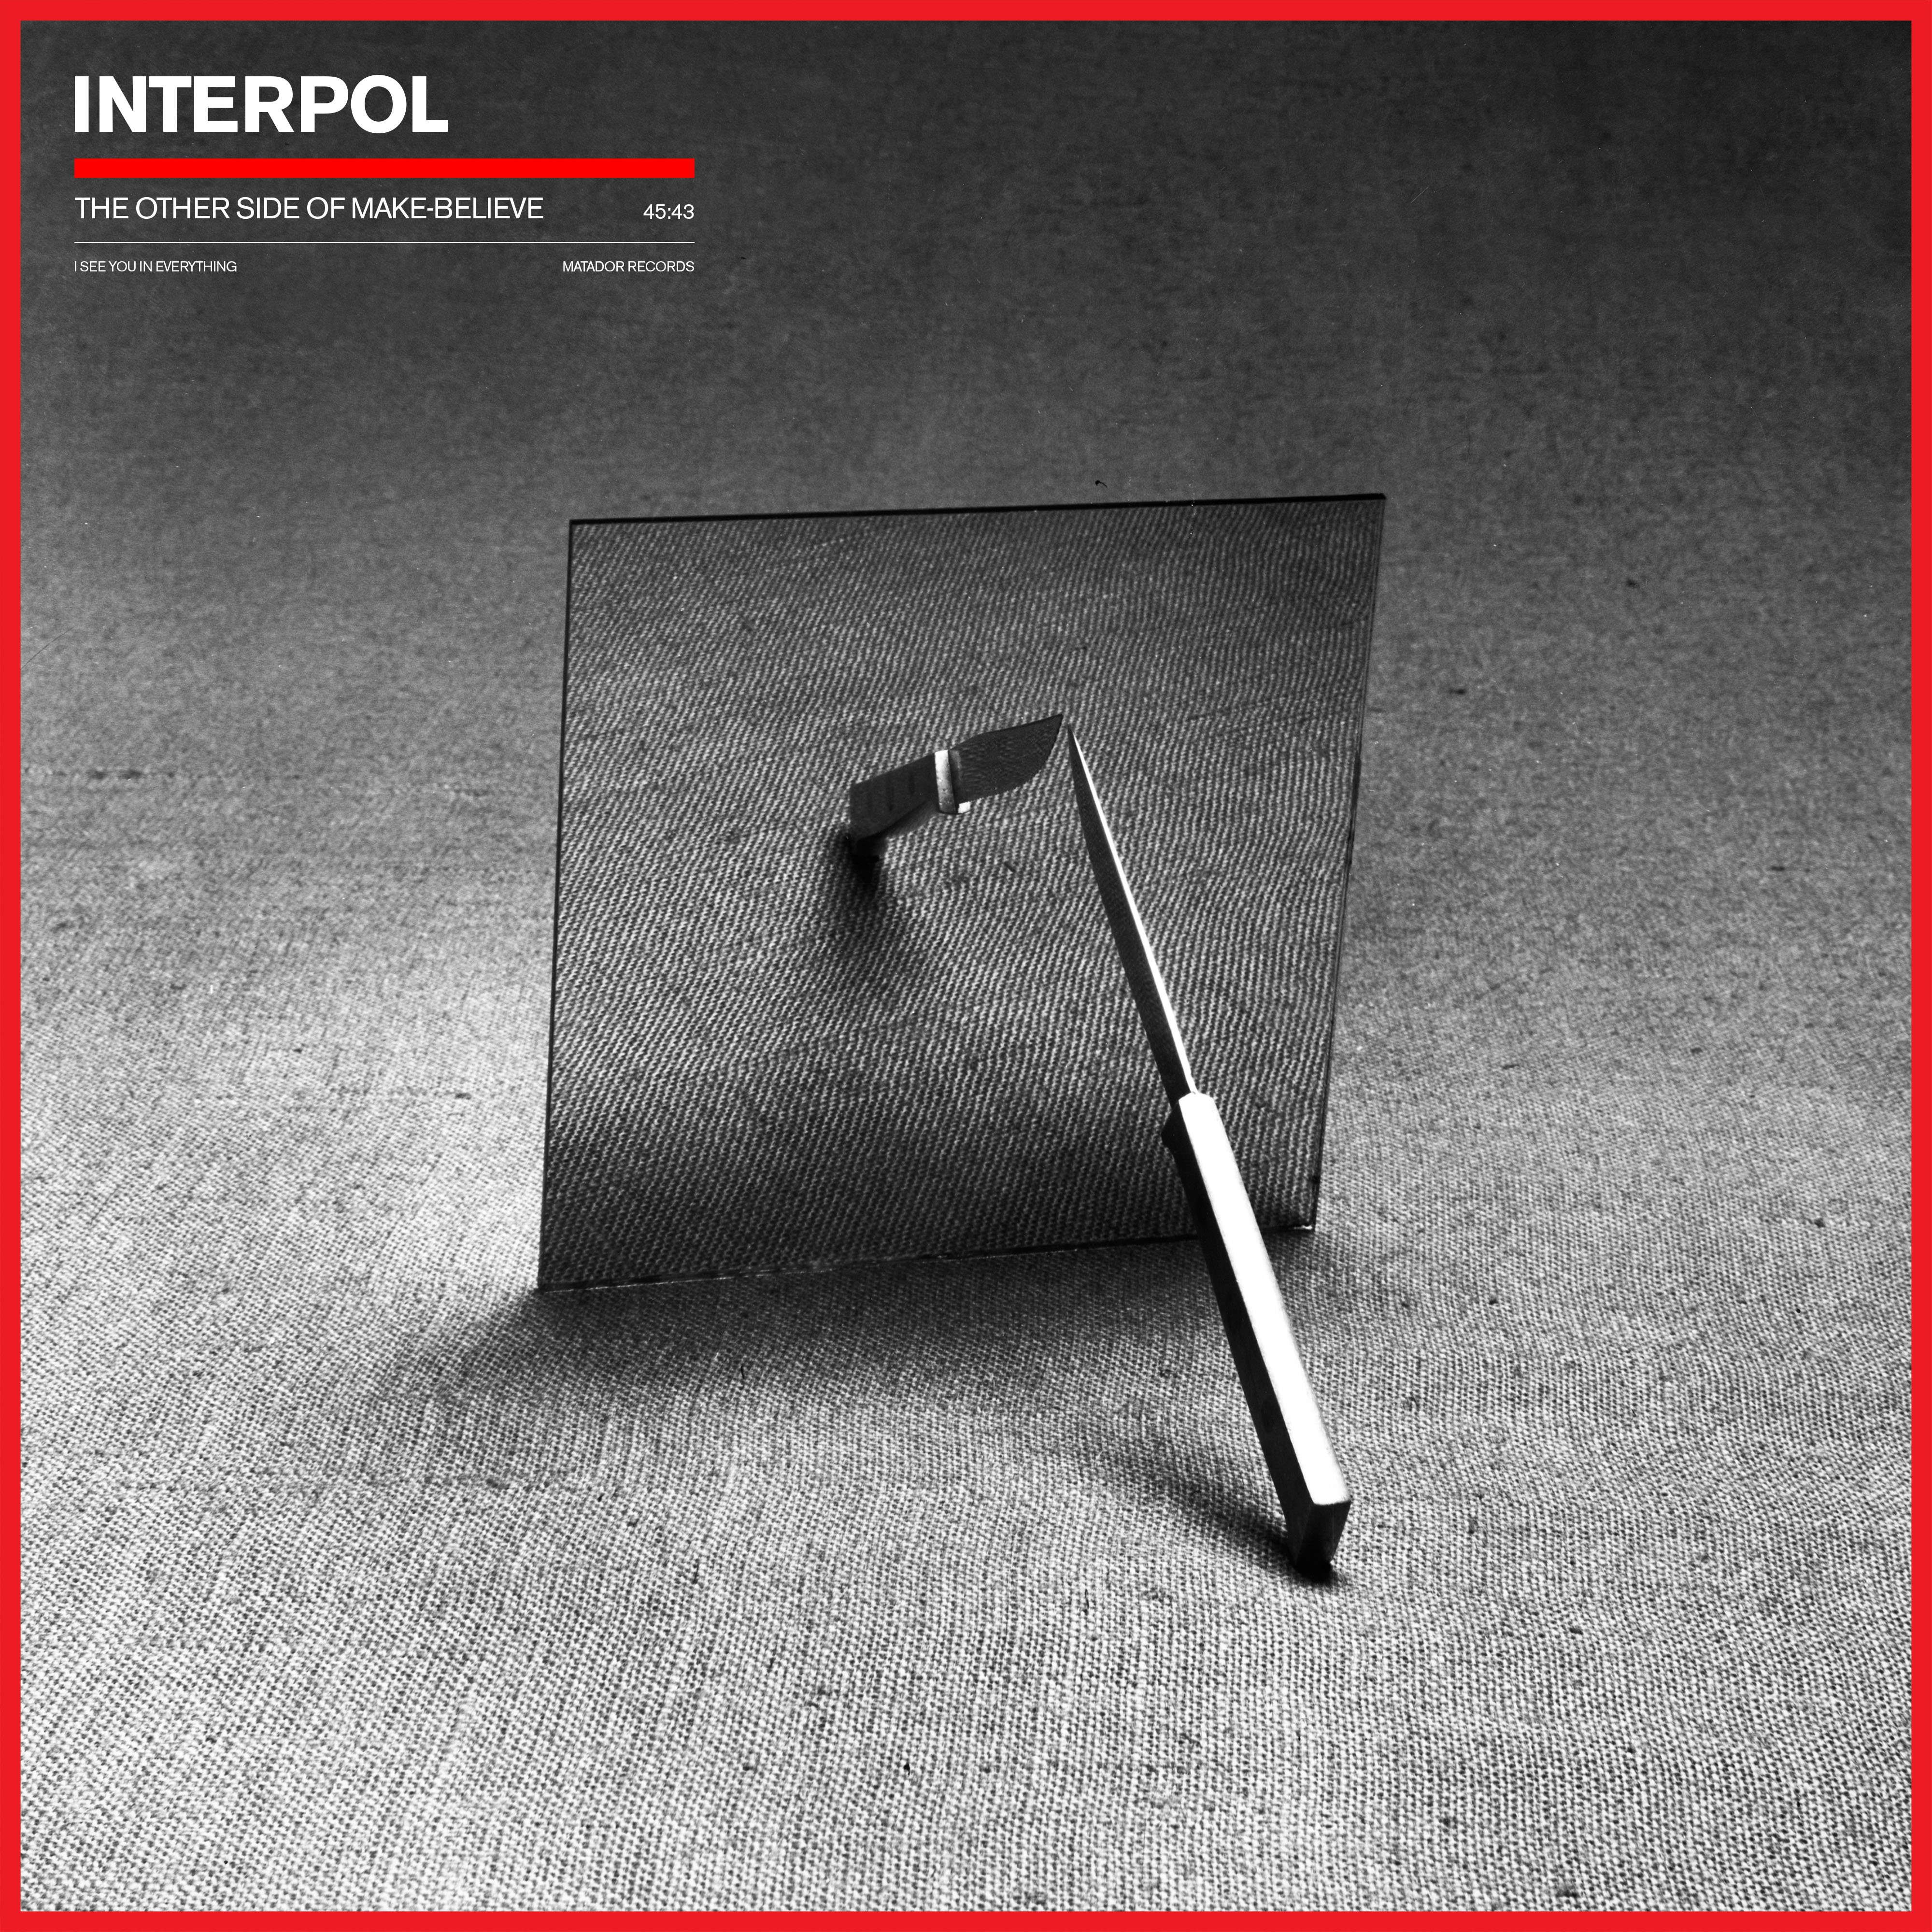 Interpol - The Other Side Of Make-Believe (2022) FLAC Download